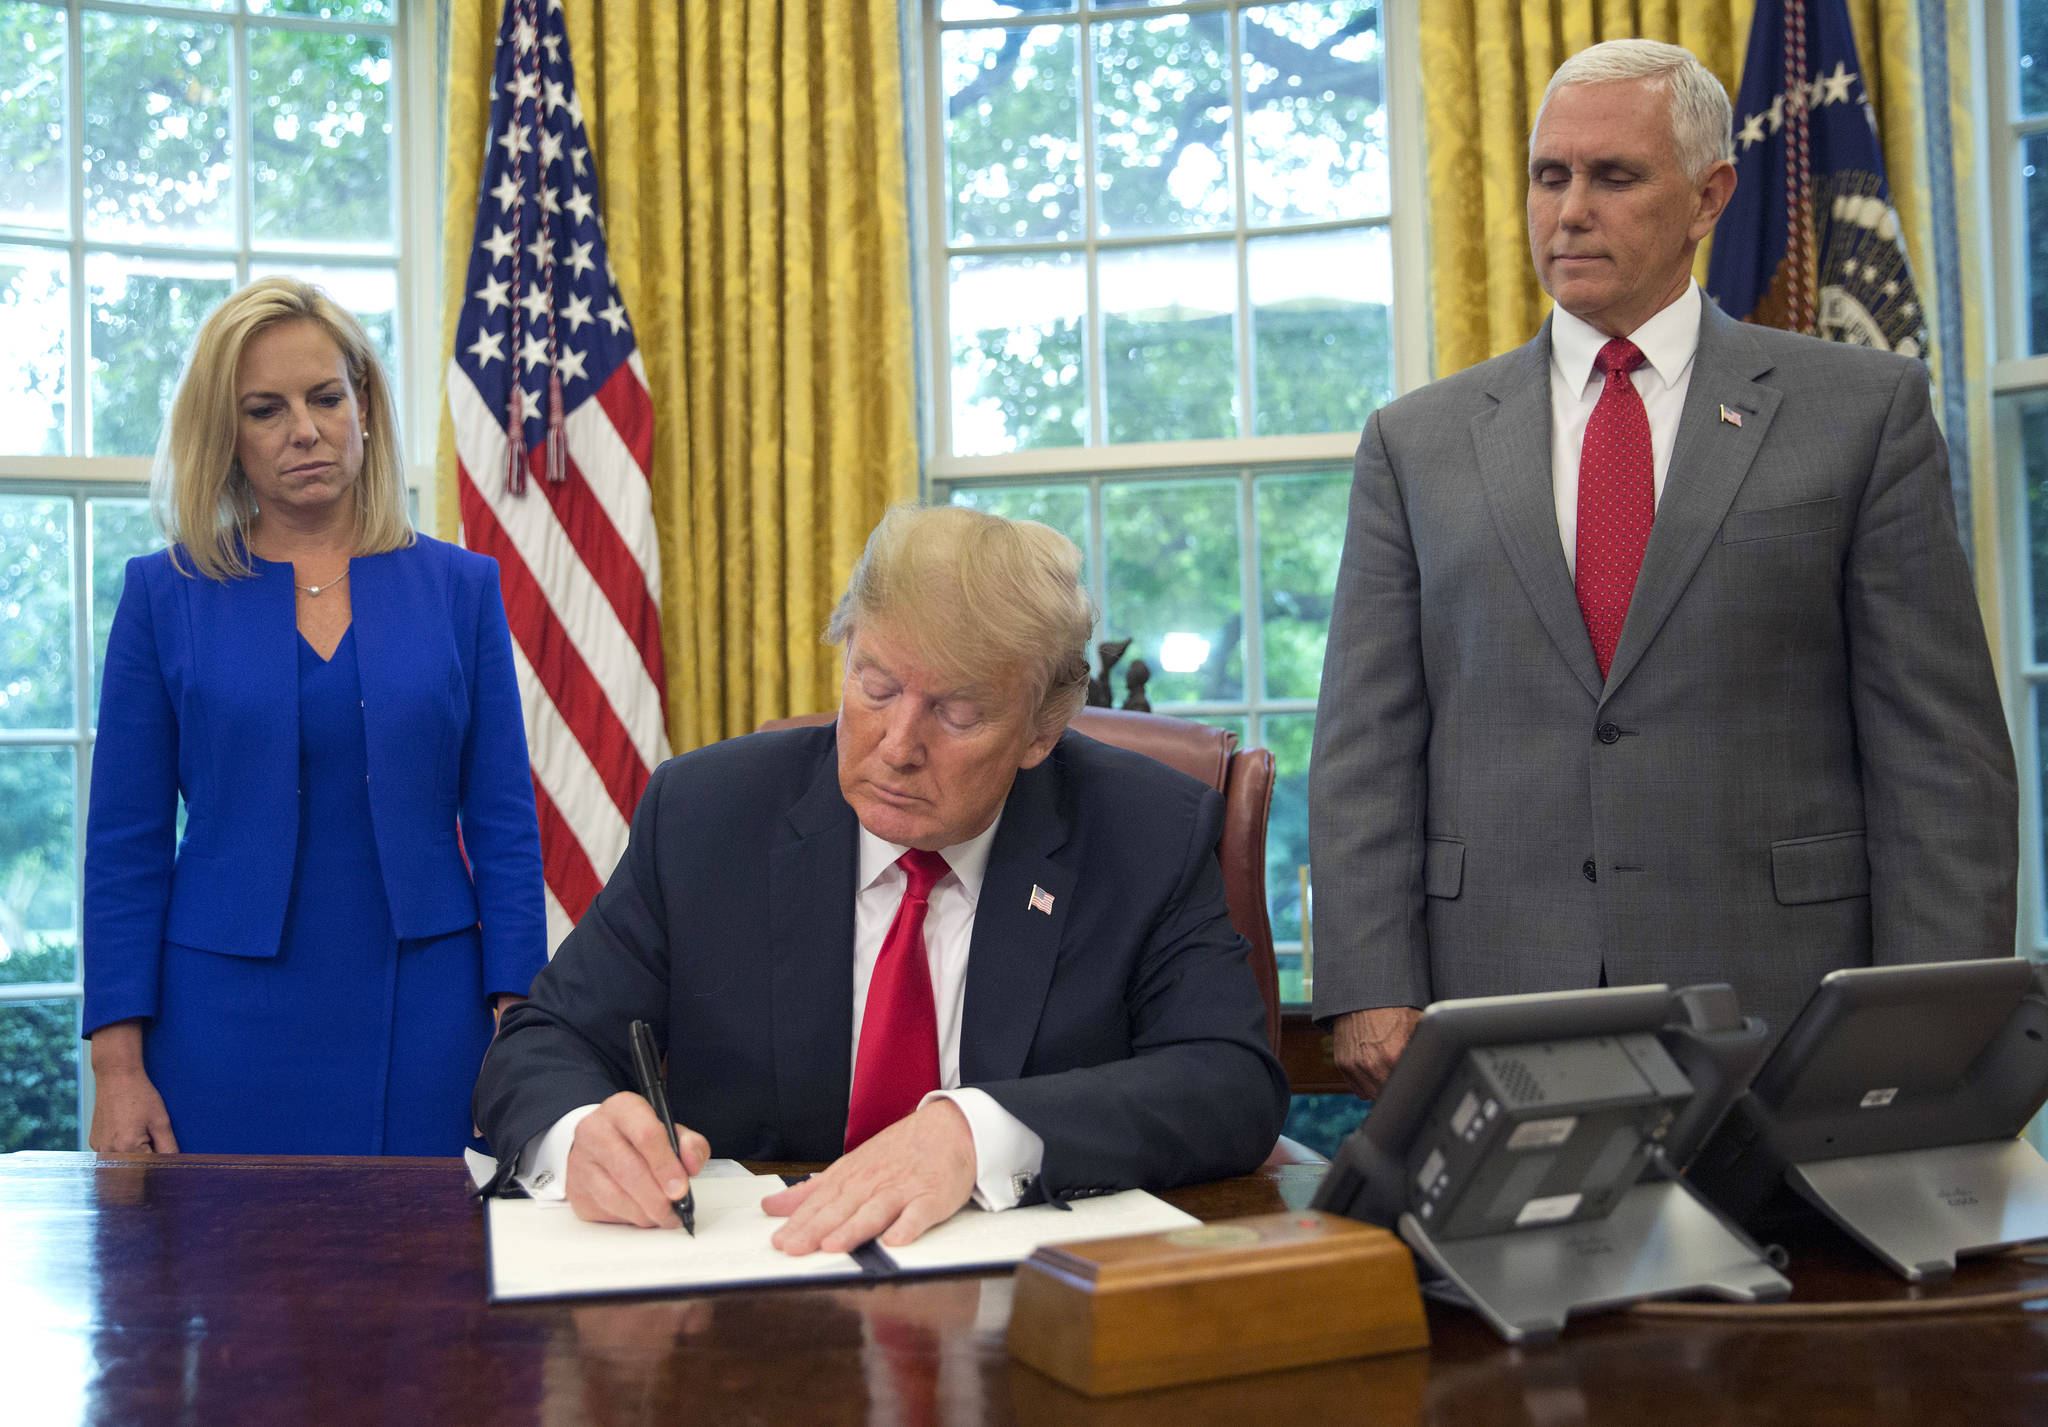 President Donald Trump signs an executive order to keep families together at the border, but says that the ‘zero-tolerance’ prosecution policy will continue, during an event in the Oval Office of the White House in Washington, Wednesday, June 20, 2018. Standing behind Trump are Homeland Security Secretary Kirstjen Nielsen, left, and Vice President Mike Pence. (Martinez Monsivais | The Associated Press)